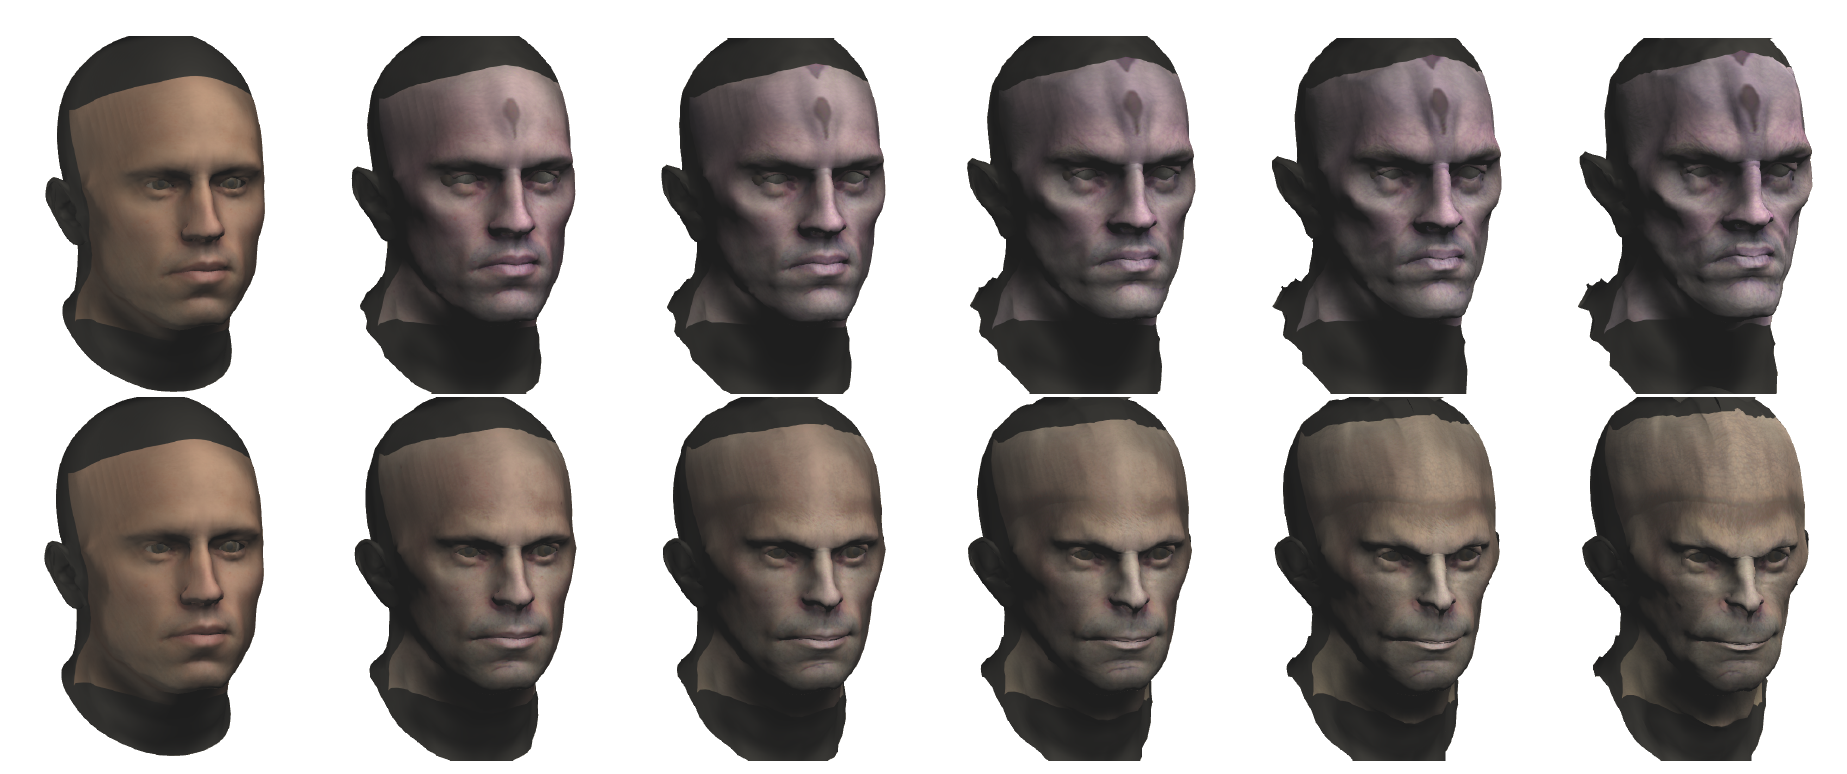 A face with various levels of two (top and bottom) non-human stylization, from low (left) to high (right). The original human face is on the left.